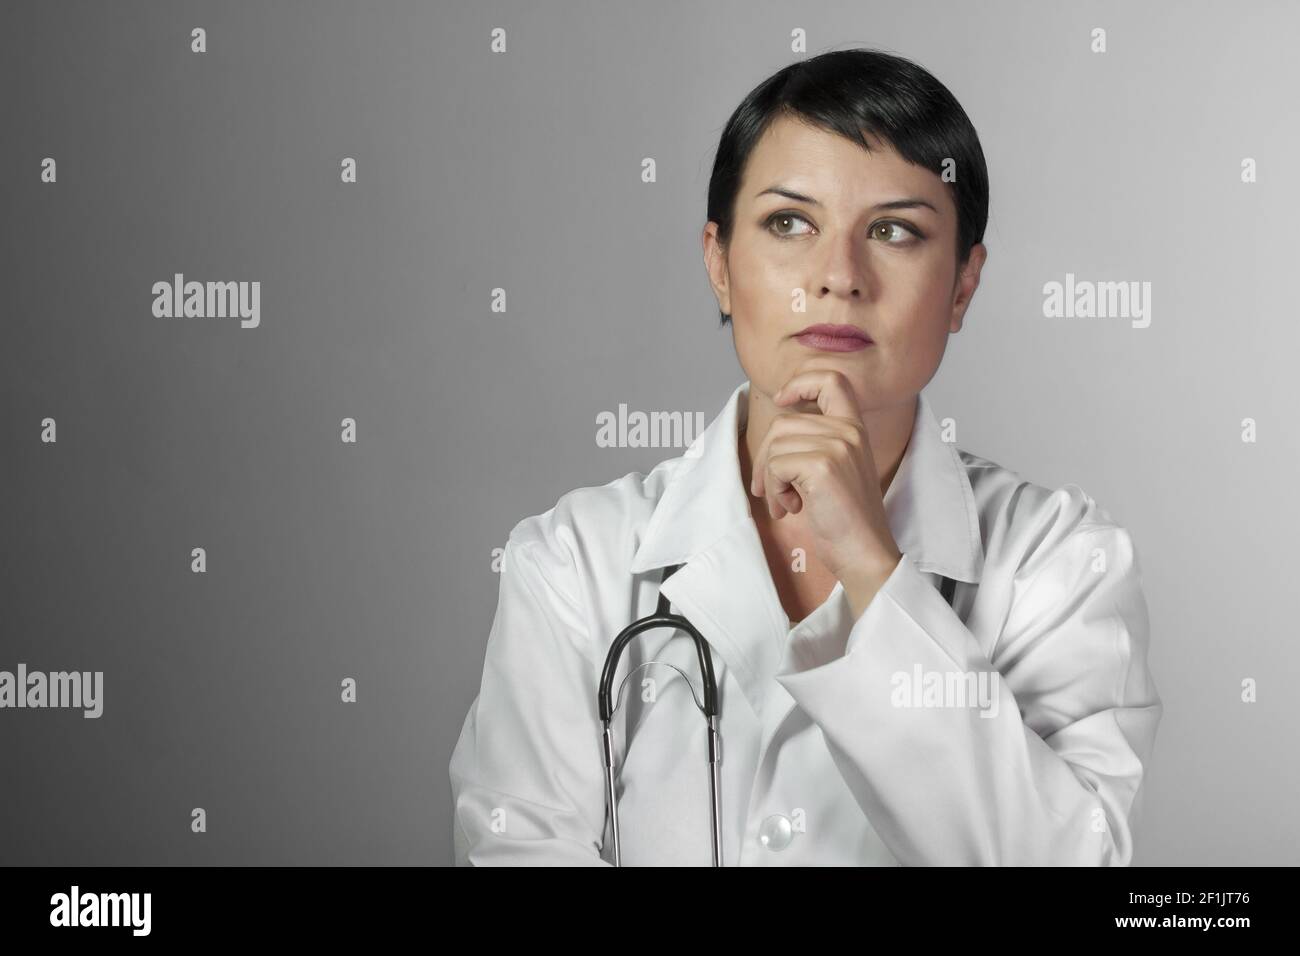 Portrait of an attractive young female doctor in white coat. Smiling medical woman doctor. Isolated over white background Stock Photo